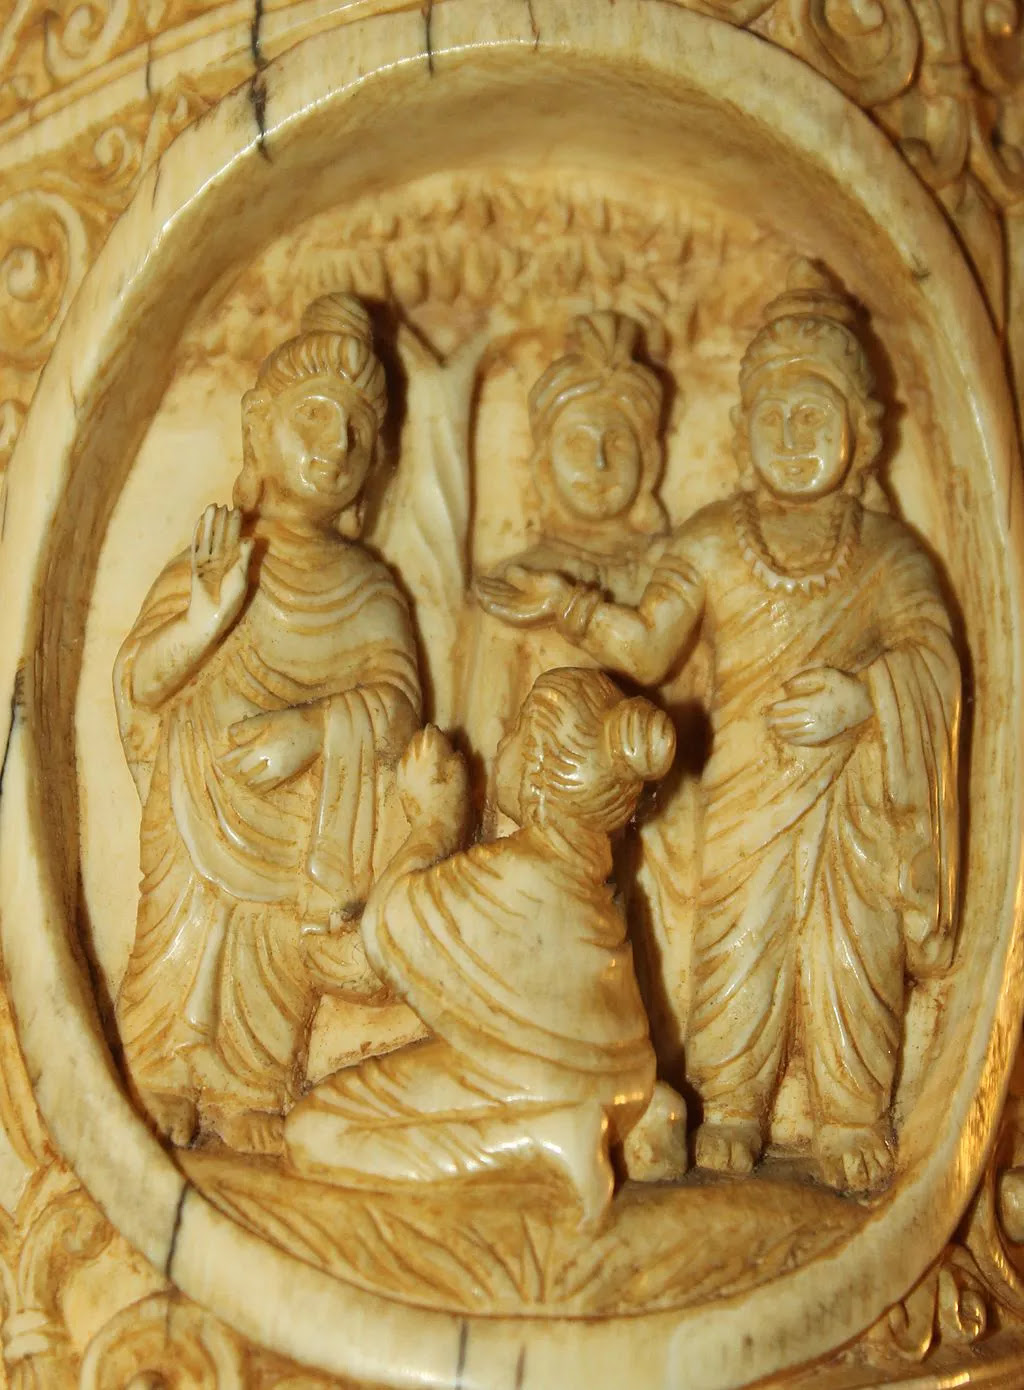 Carving of Buddha and some of his diciples.